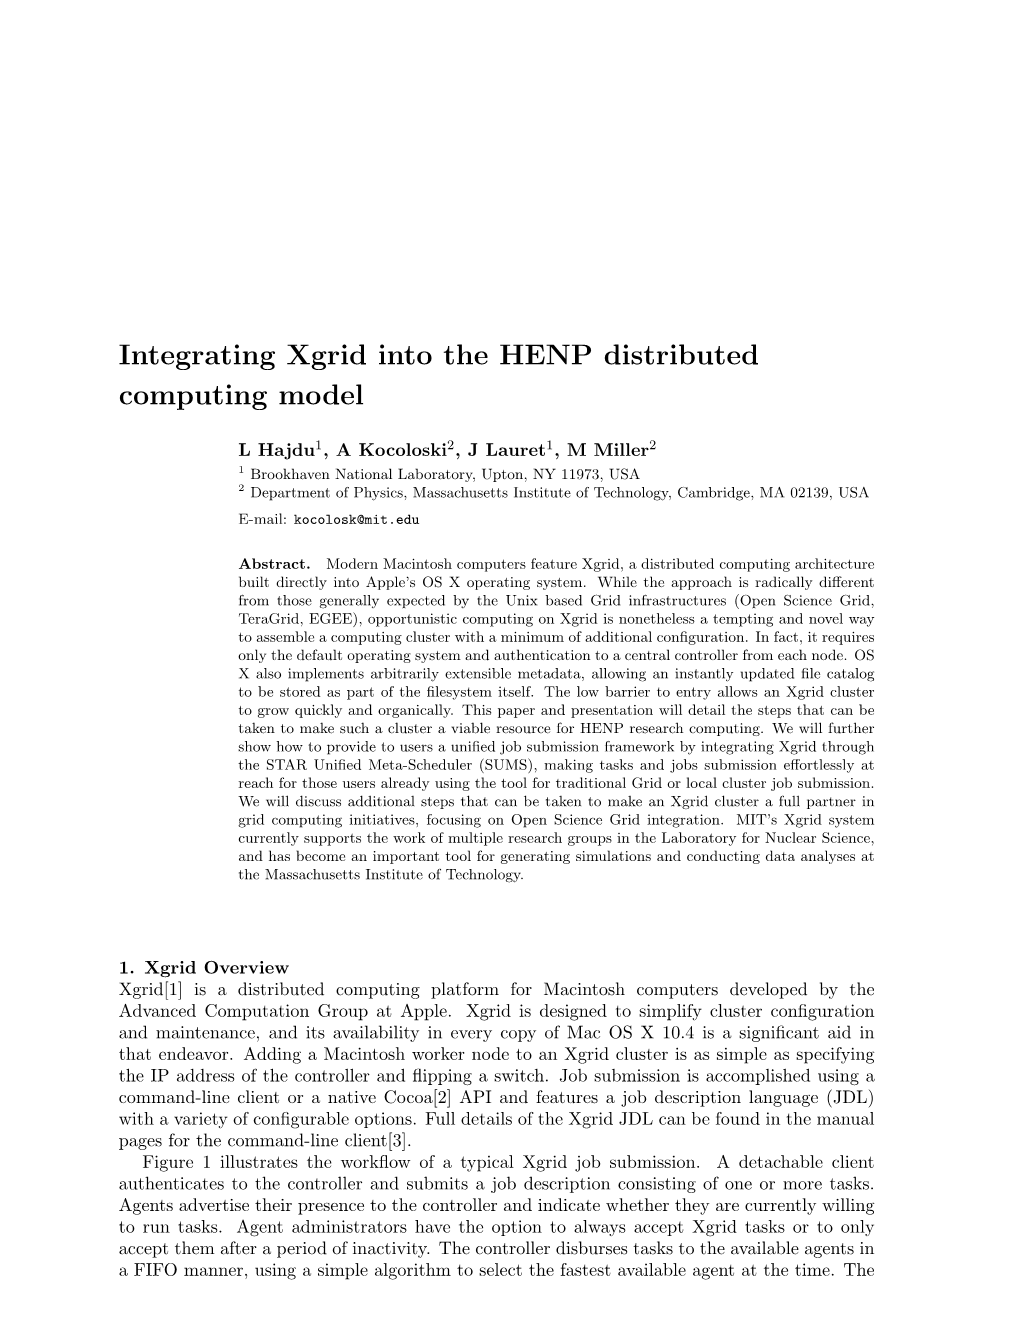 Integrating Xgrid Into the HENP Distributed Computing Model